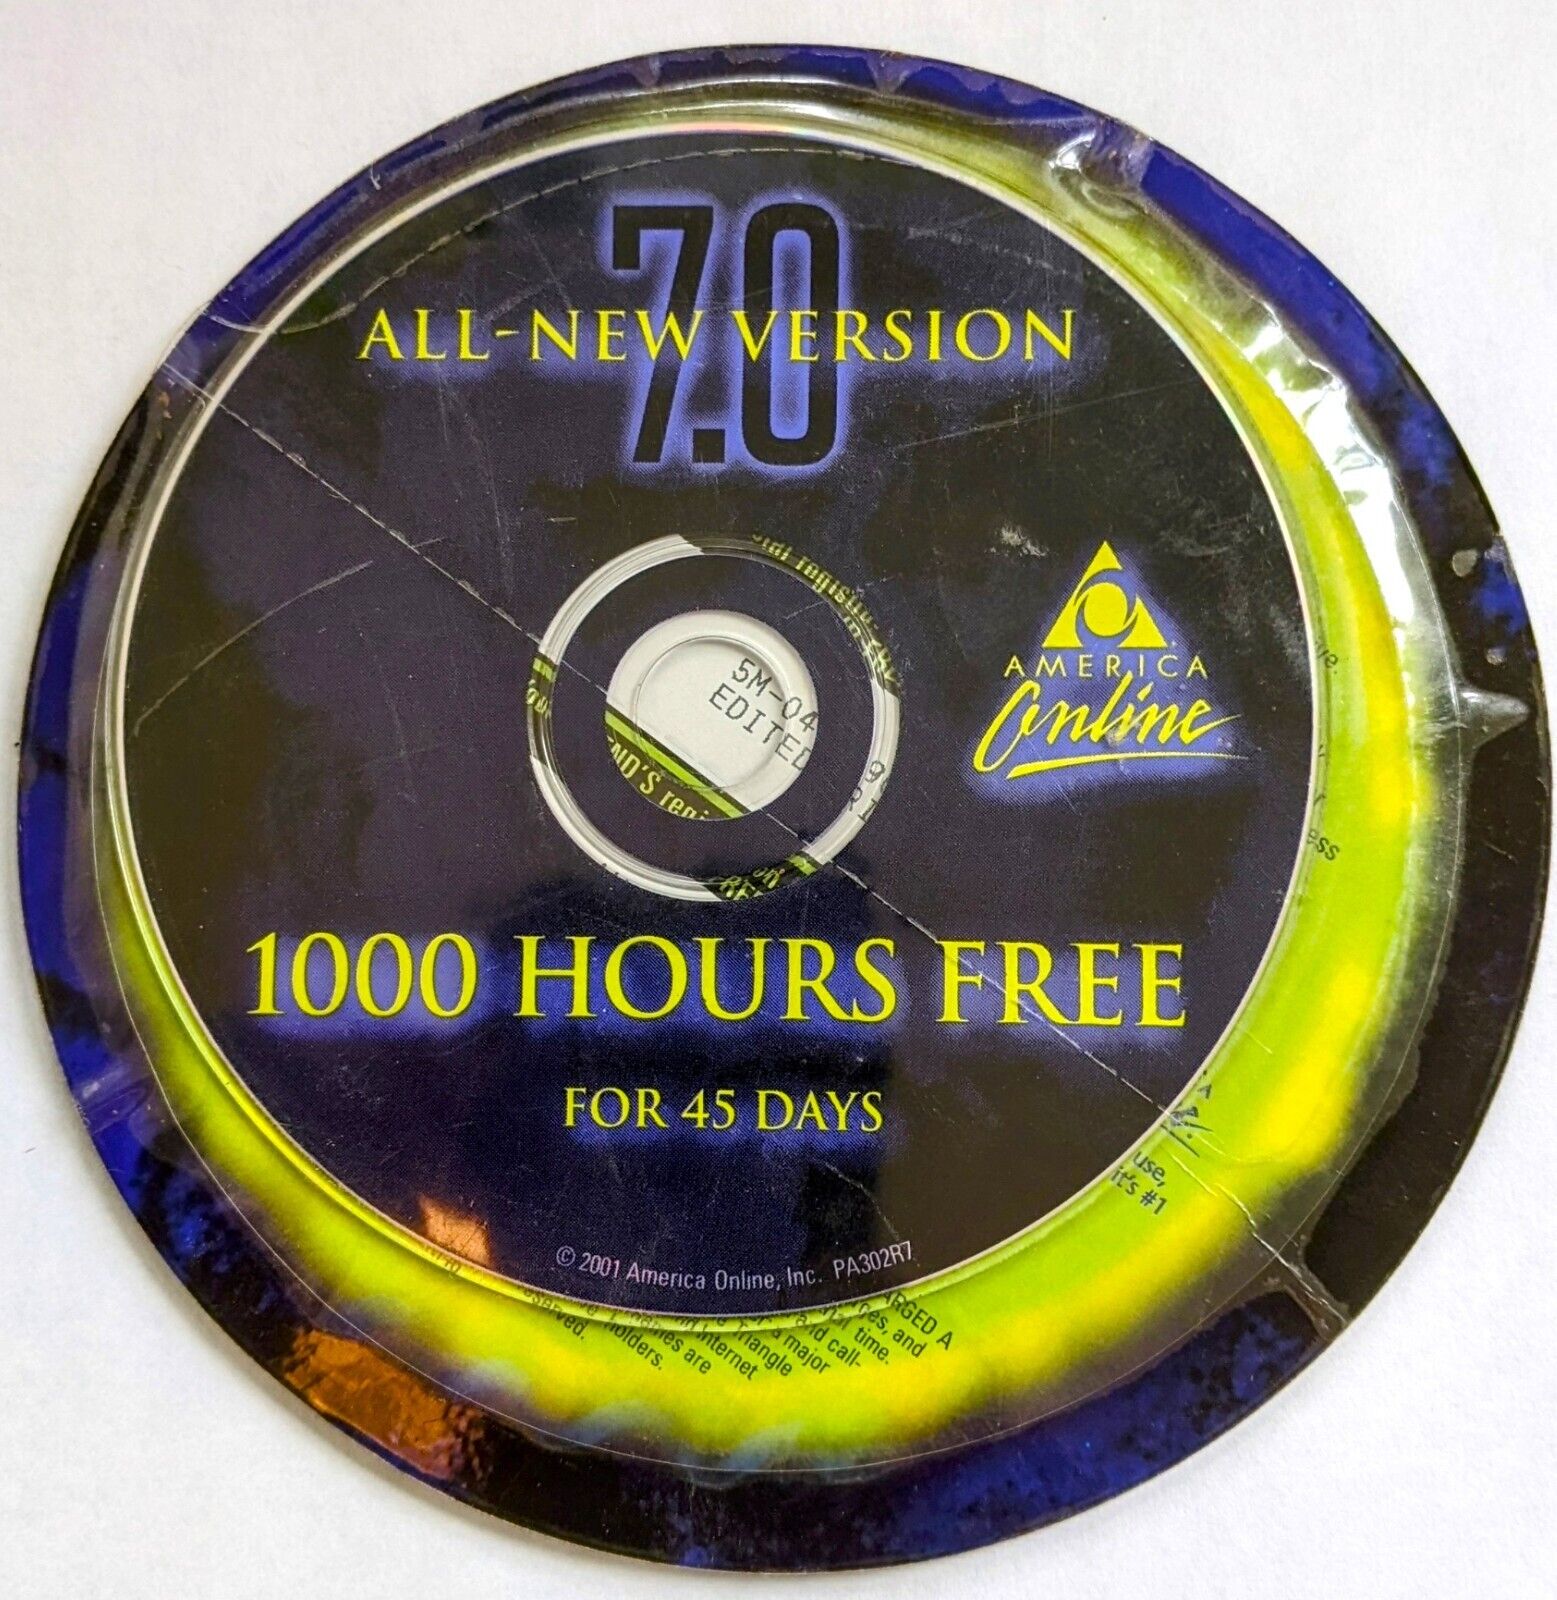 Rare ECLIPSE America Online Collectible Disc, AOL CD ver 7.0 Sealed, 